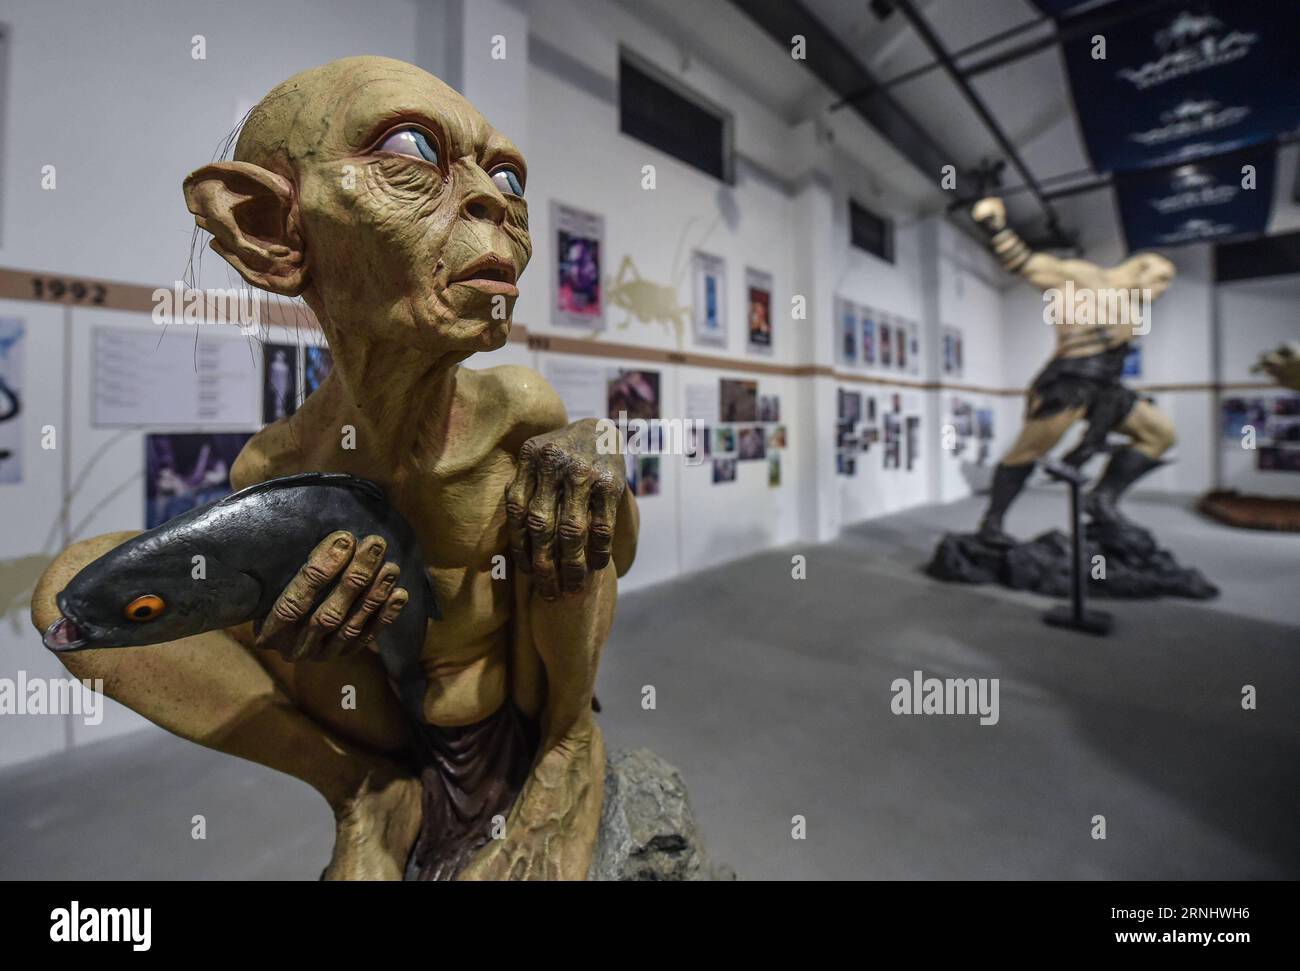 Buy The Lord of the Rings: Gollum™ - Art Exhibition - Microsoft Store en-IN